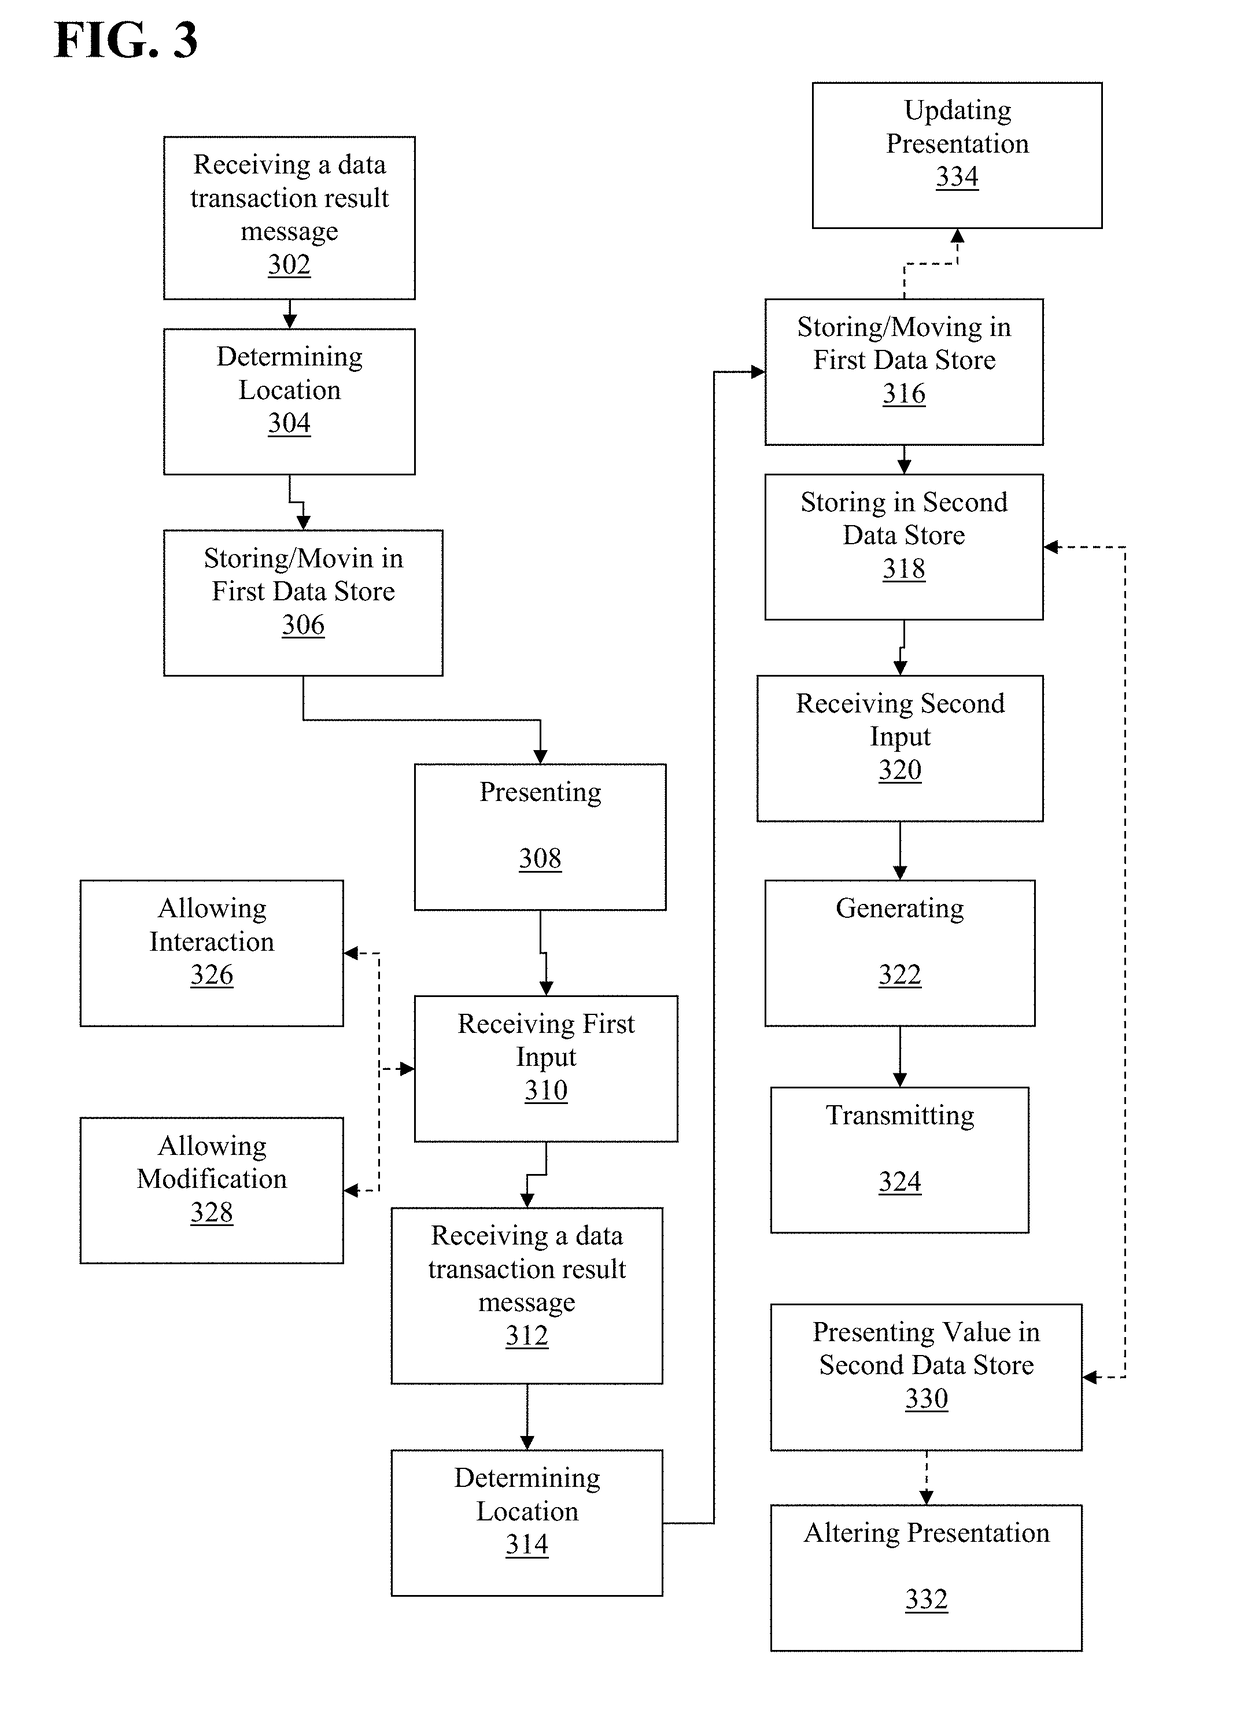 Facilitation of deterministic interaction with a dynamically changing transaction processing environment